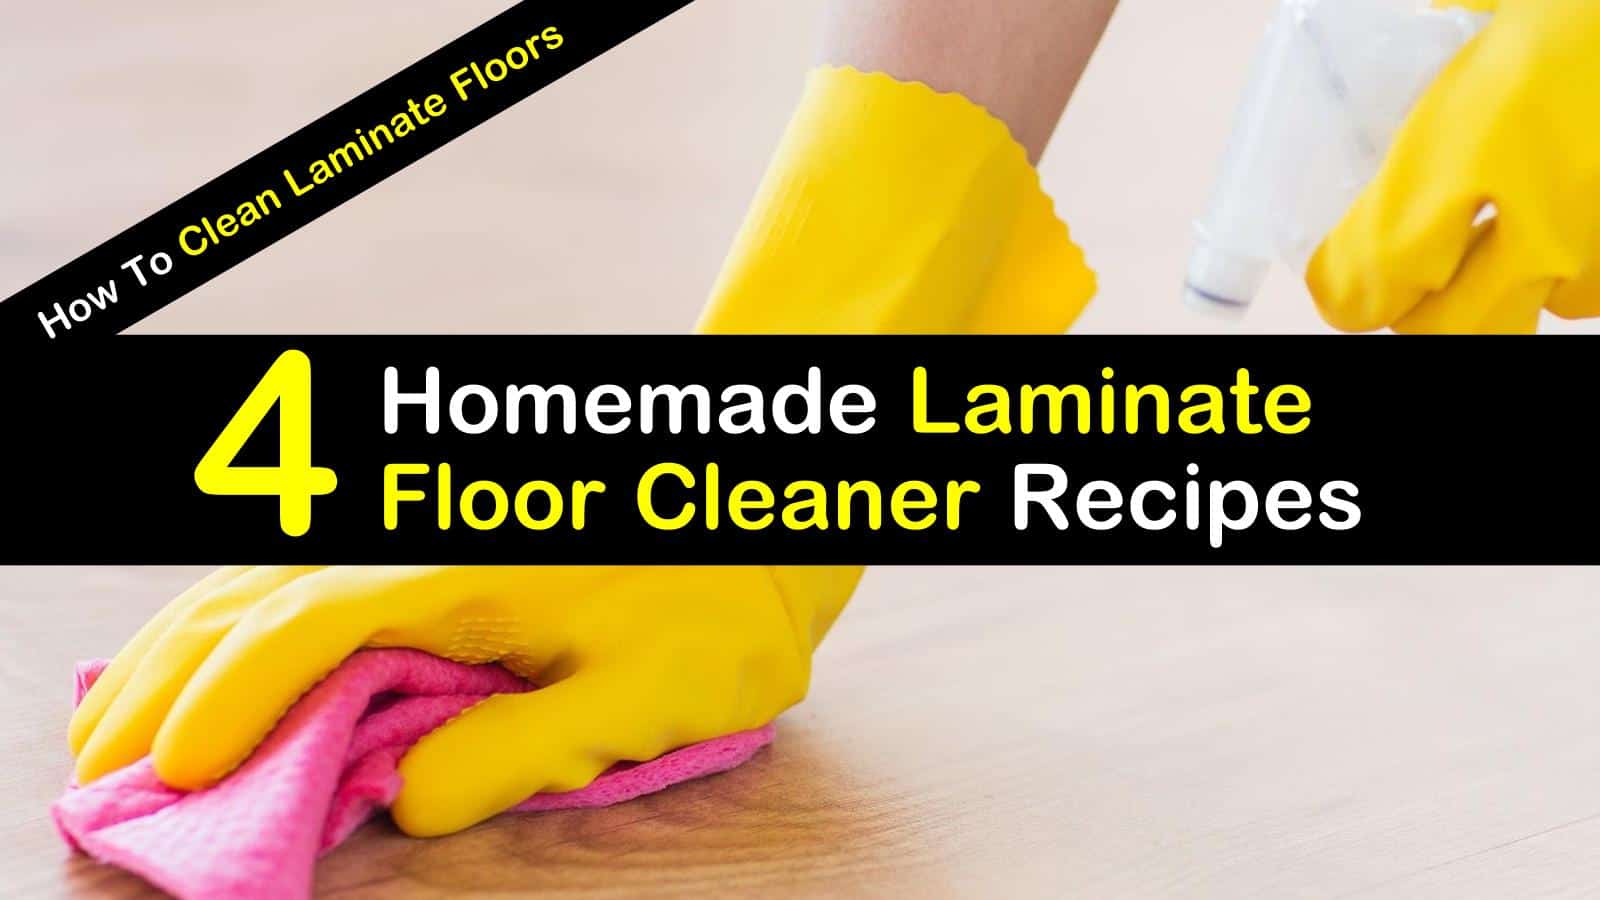 How To Clean Laminate Floors 4, How To Clean Laminate Tile Floors